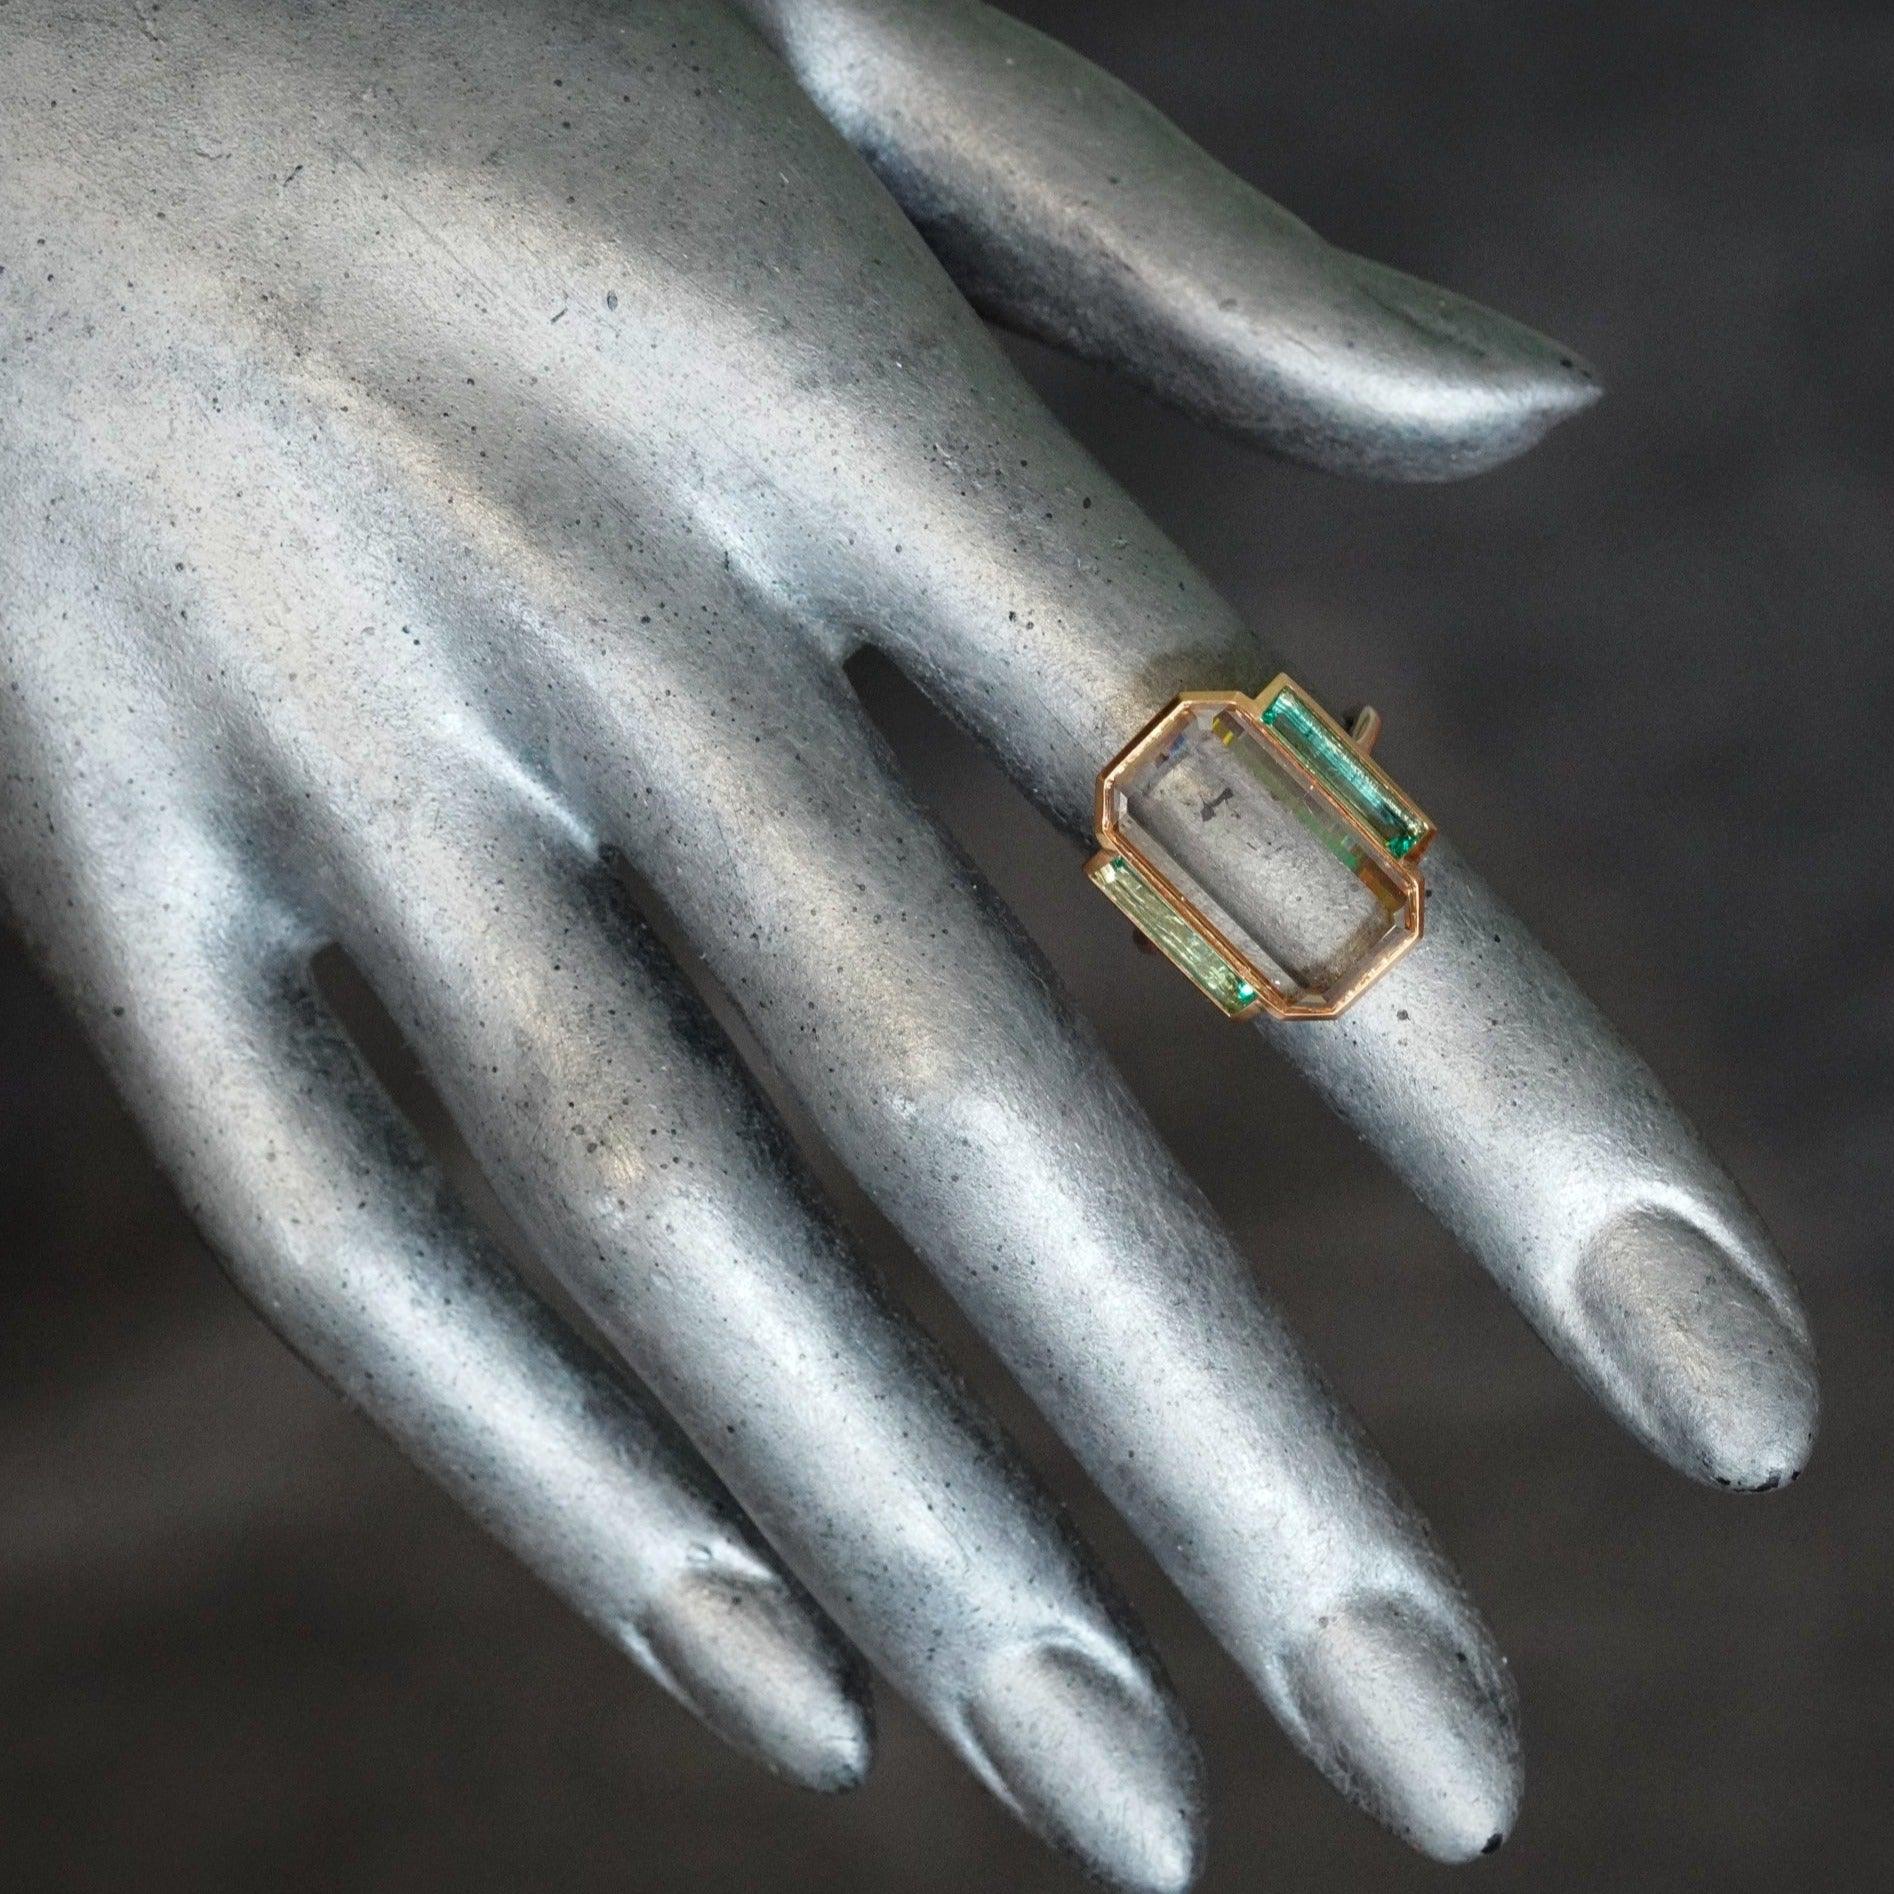 Handcrafted jewelry featuring step cut emeralds and a large diamond